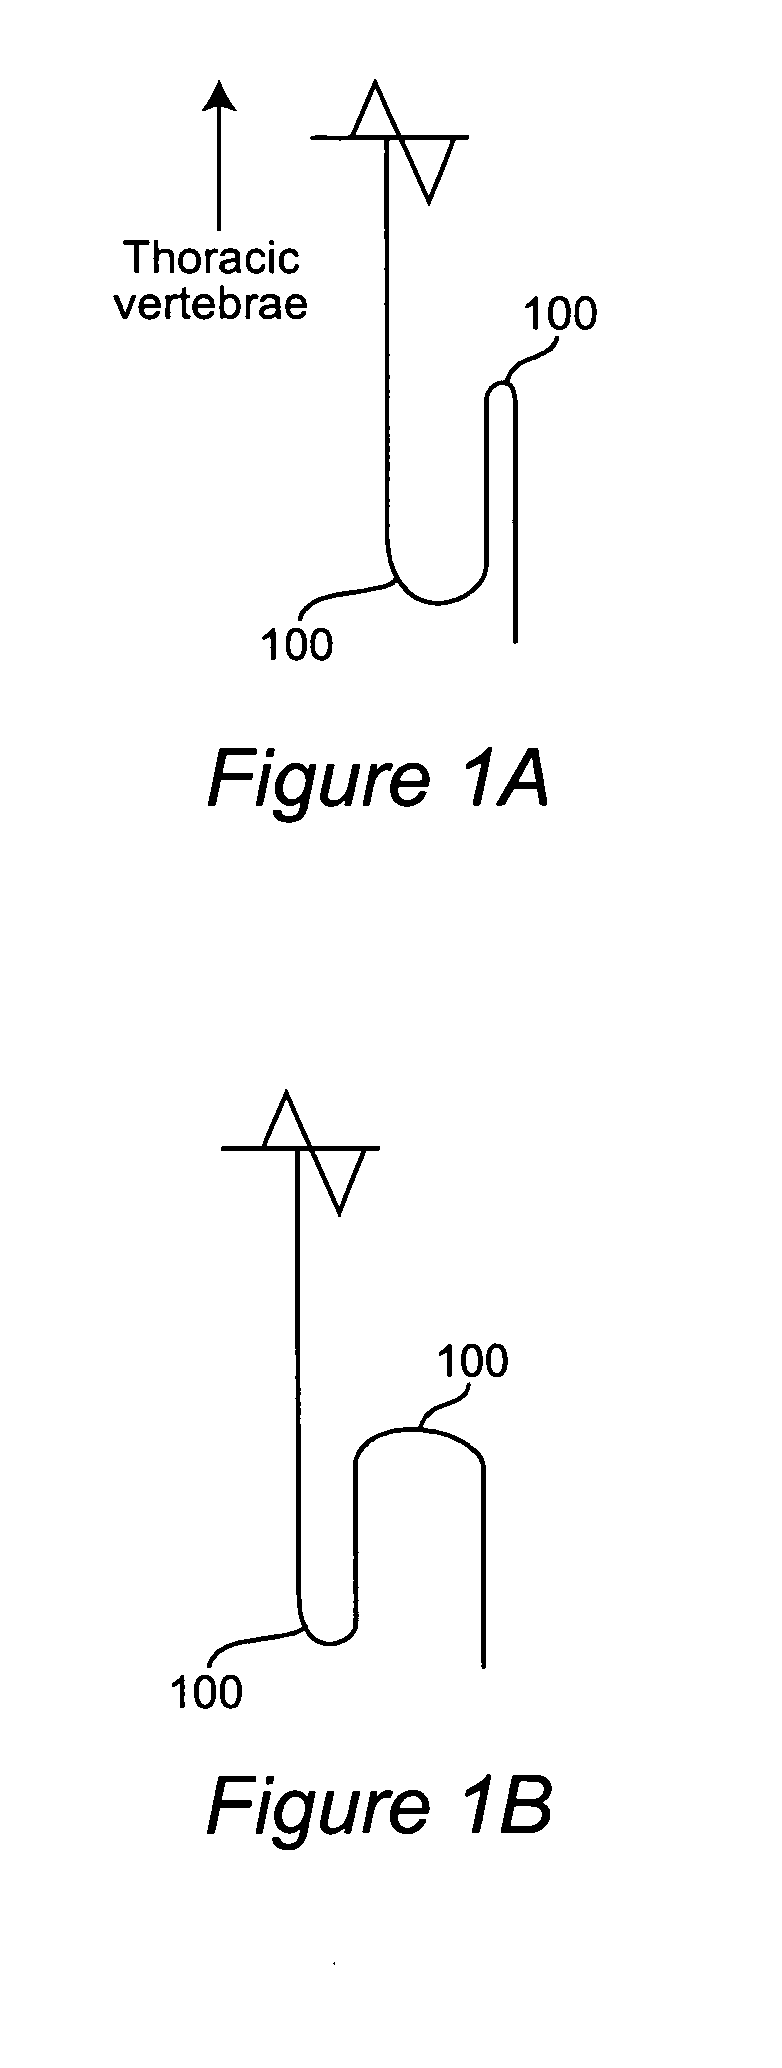 Computer-aided three-dimensional bending of spinal rod implants, other surgical implants and other articles, systems for three-dimensional shaping, and apparatuses therefor